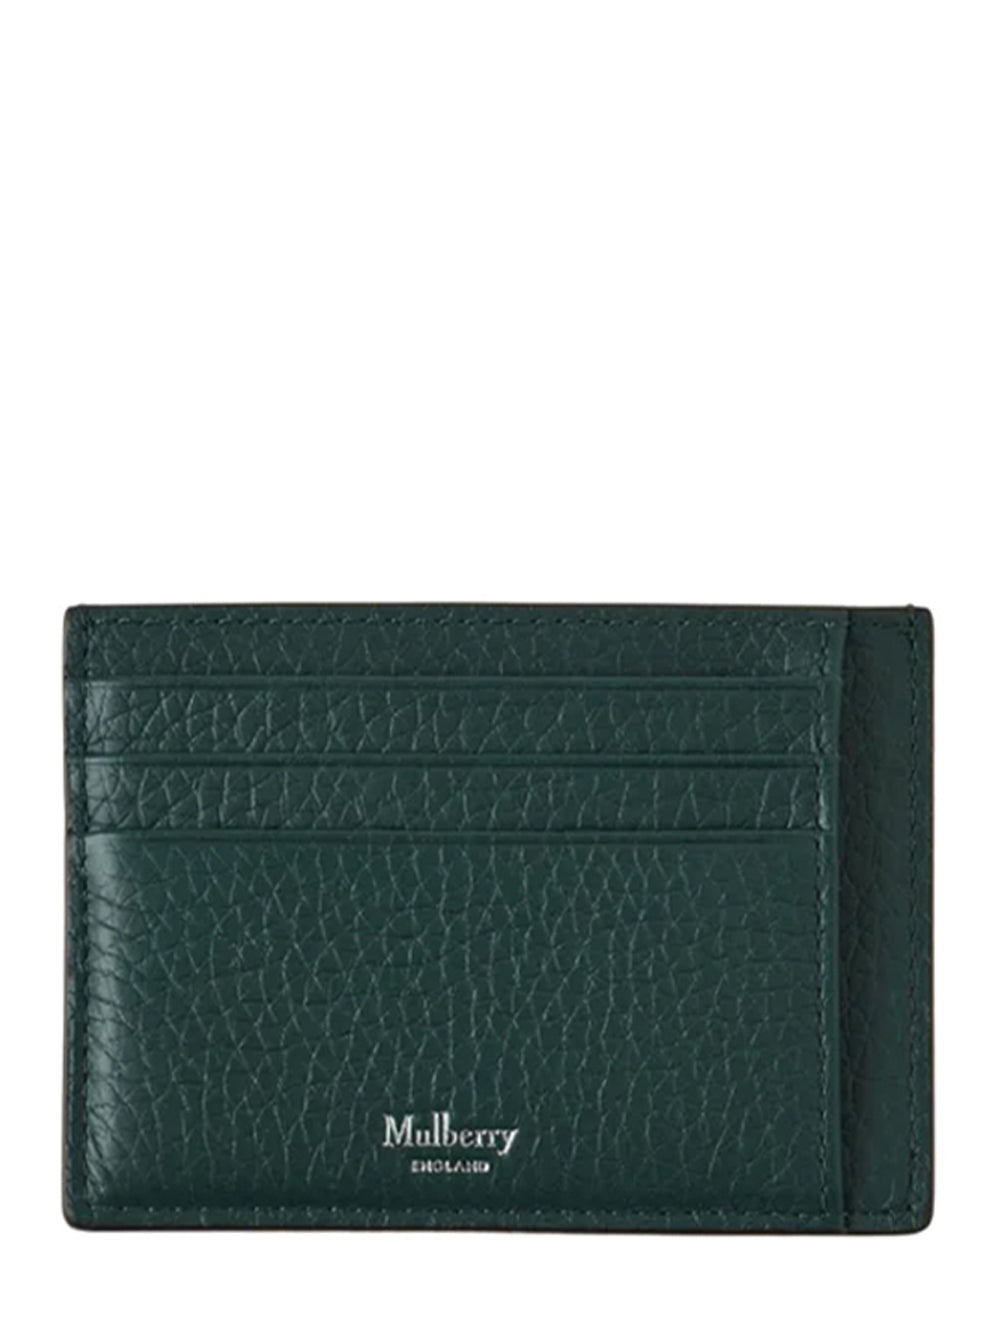 Card Holder (Mulberry Green)